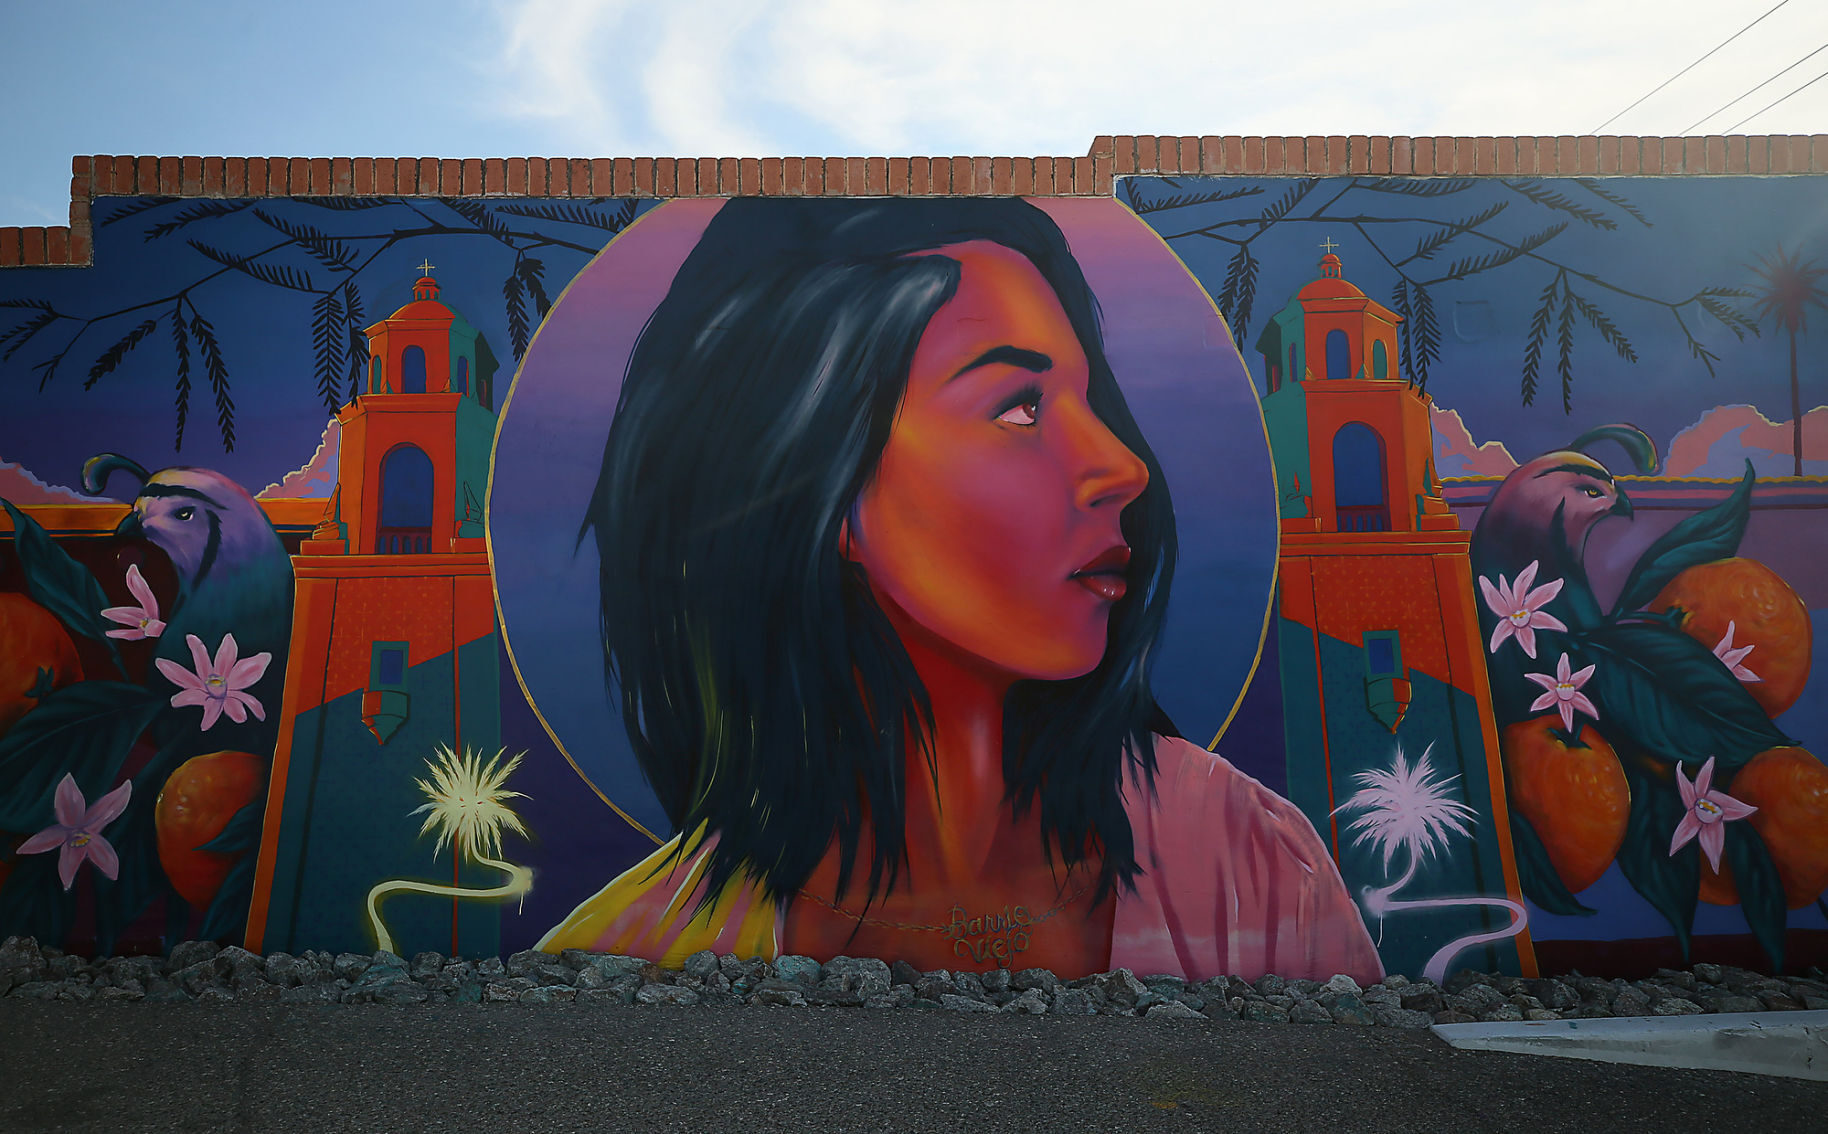 Artistic and quirky A walking tour of Barrio Viejo in Tucson